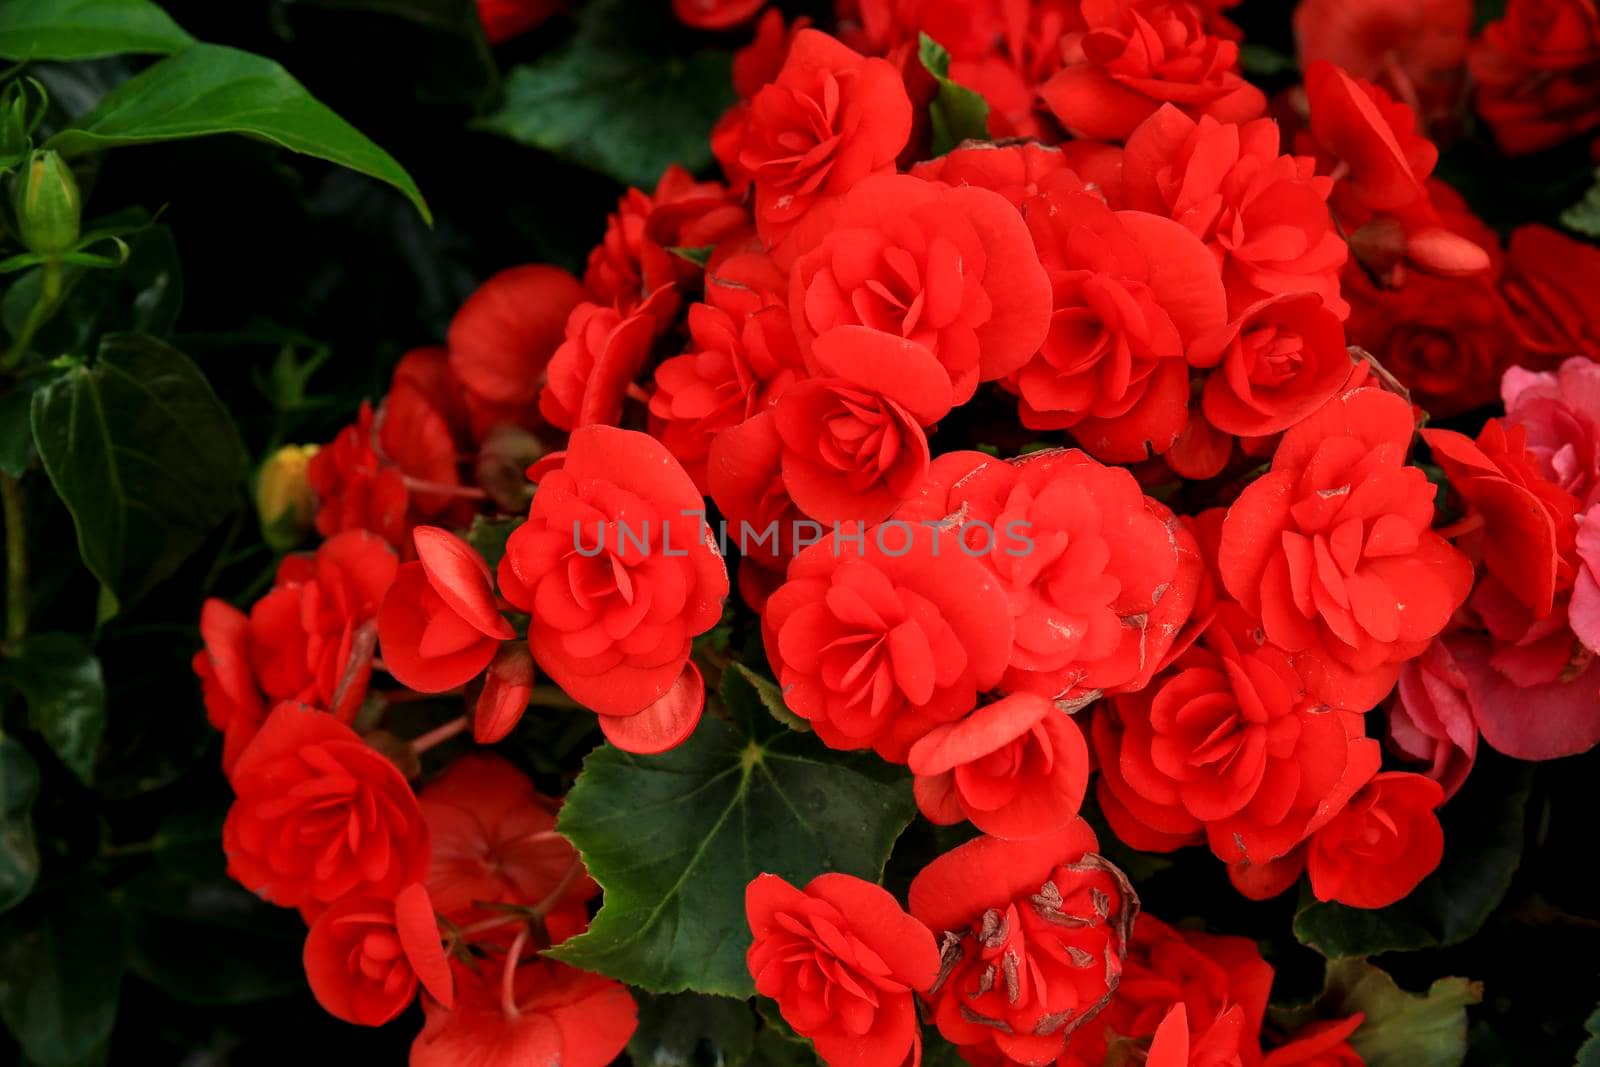 Red Begonia Evansiana Andrews plants in the garden by soniabonet